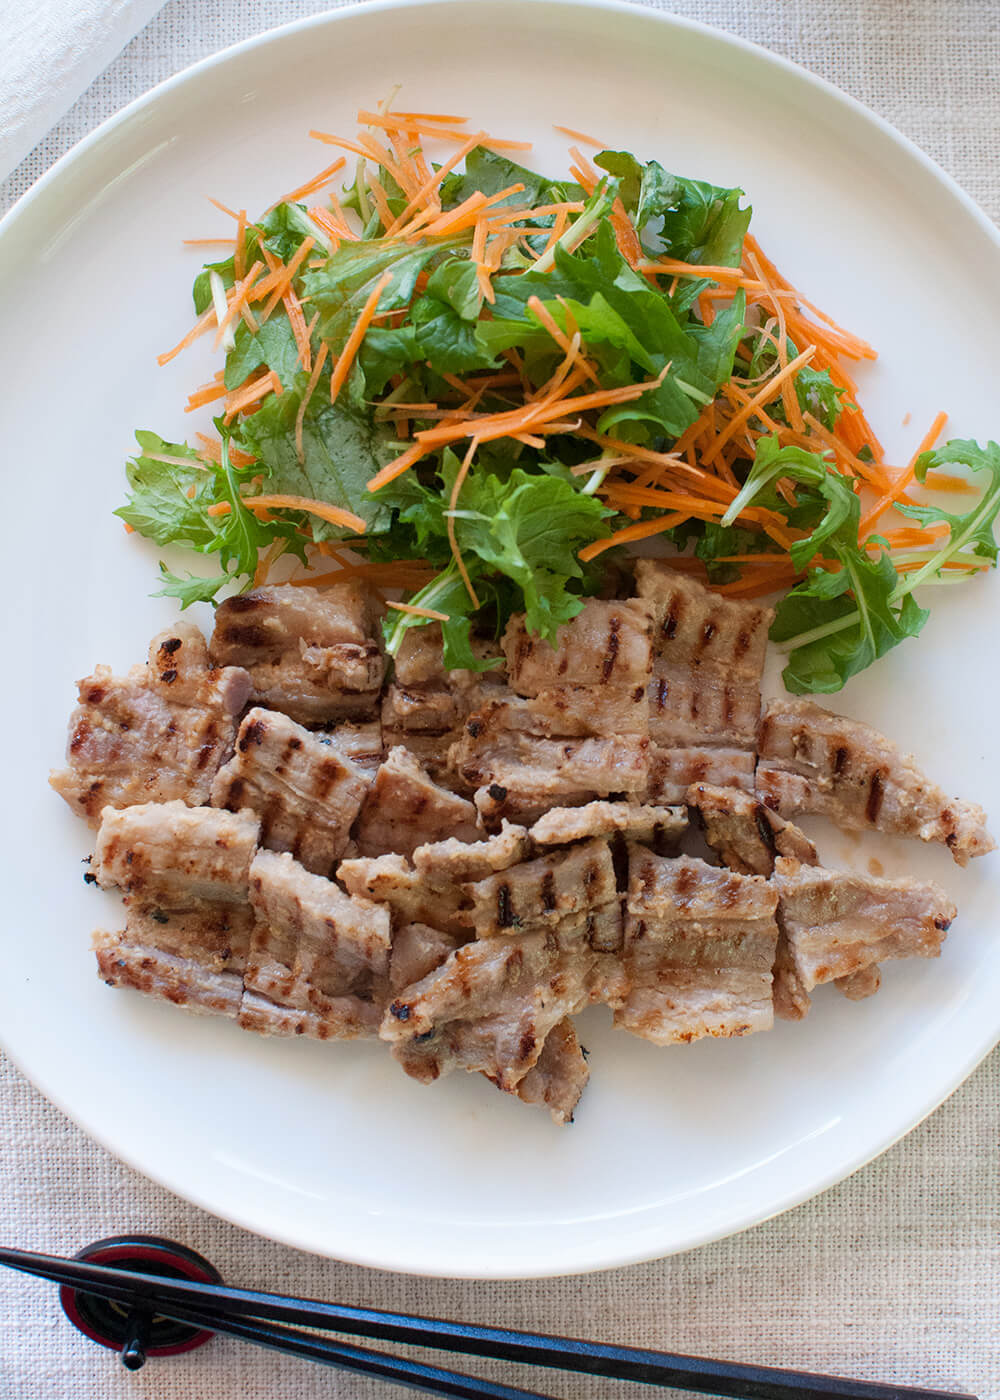 Pork Kasuzuke cooked on a griddle pan look appertaining with burnt lines. Served with mizuna and carrot salad.